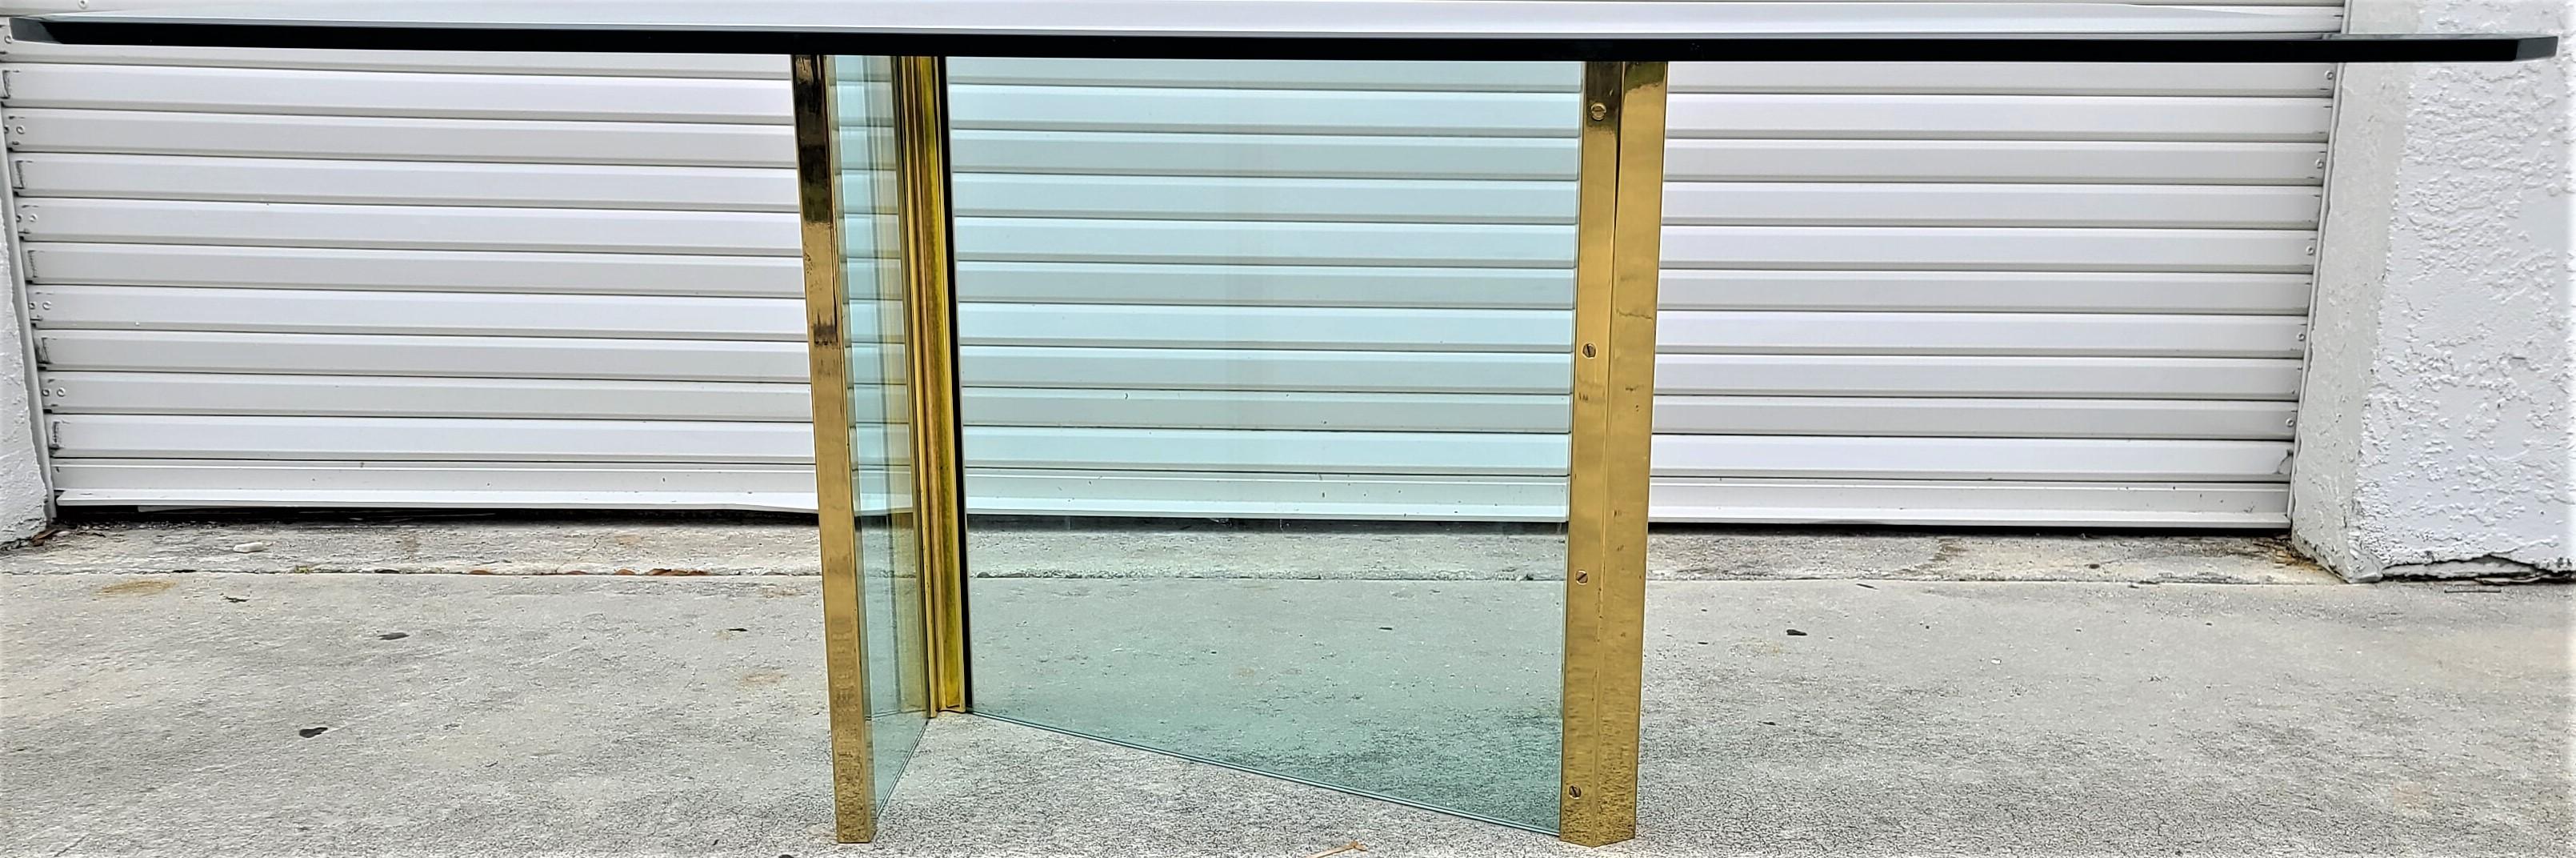 Offering one of our recent Palm Beach Estate fine furniture acquisitions of a
1970's Leon Rosen for Pace Collection glass & brass dining table

Approximate measurements in inches
Table with base:
28.75